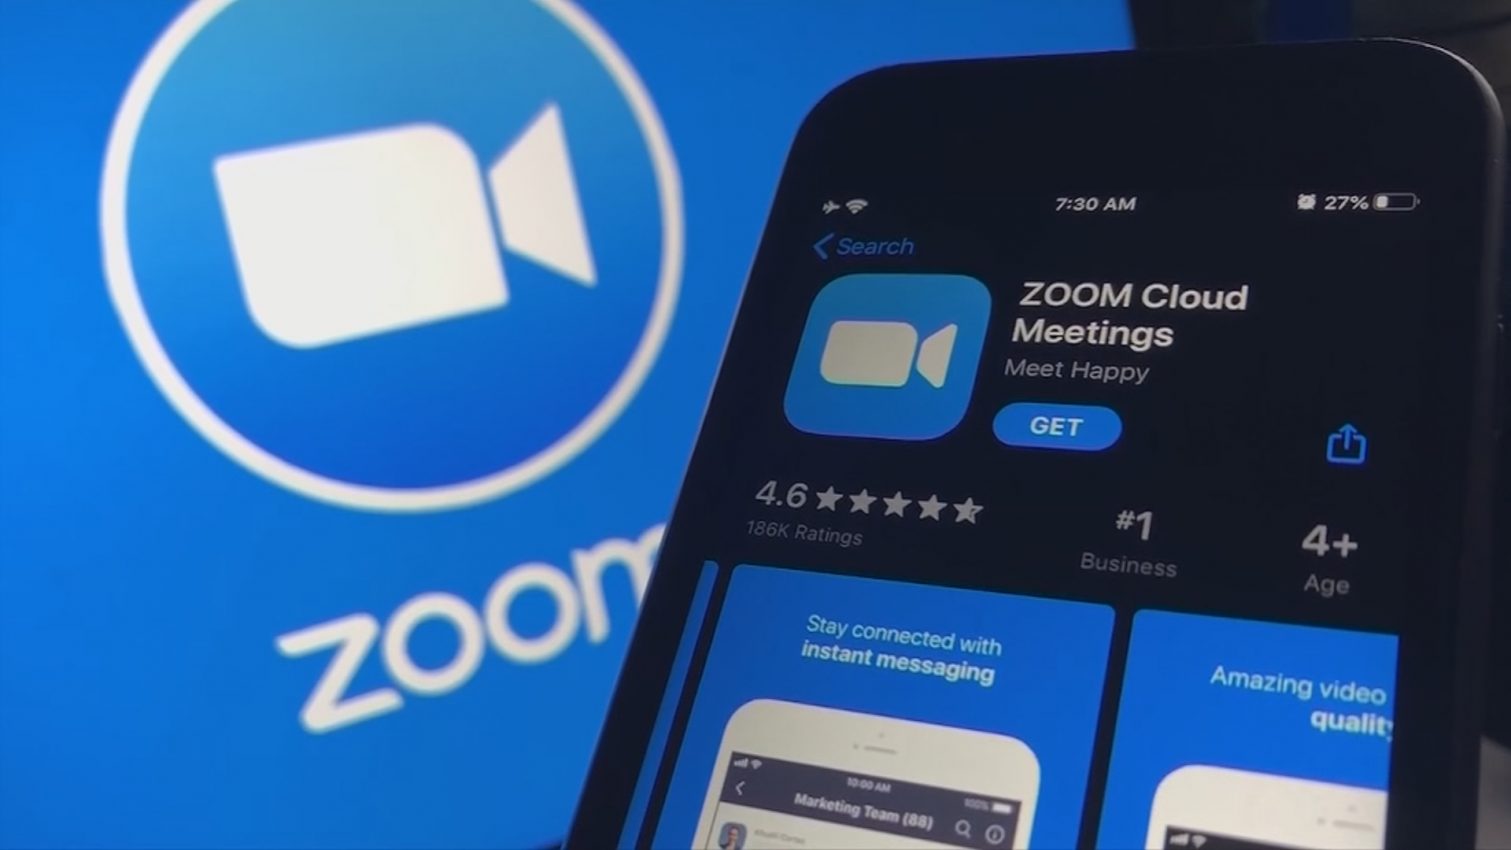 Taiwan bans Zoom over security fears from China